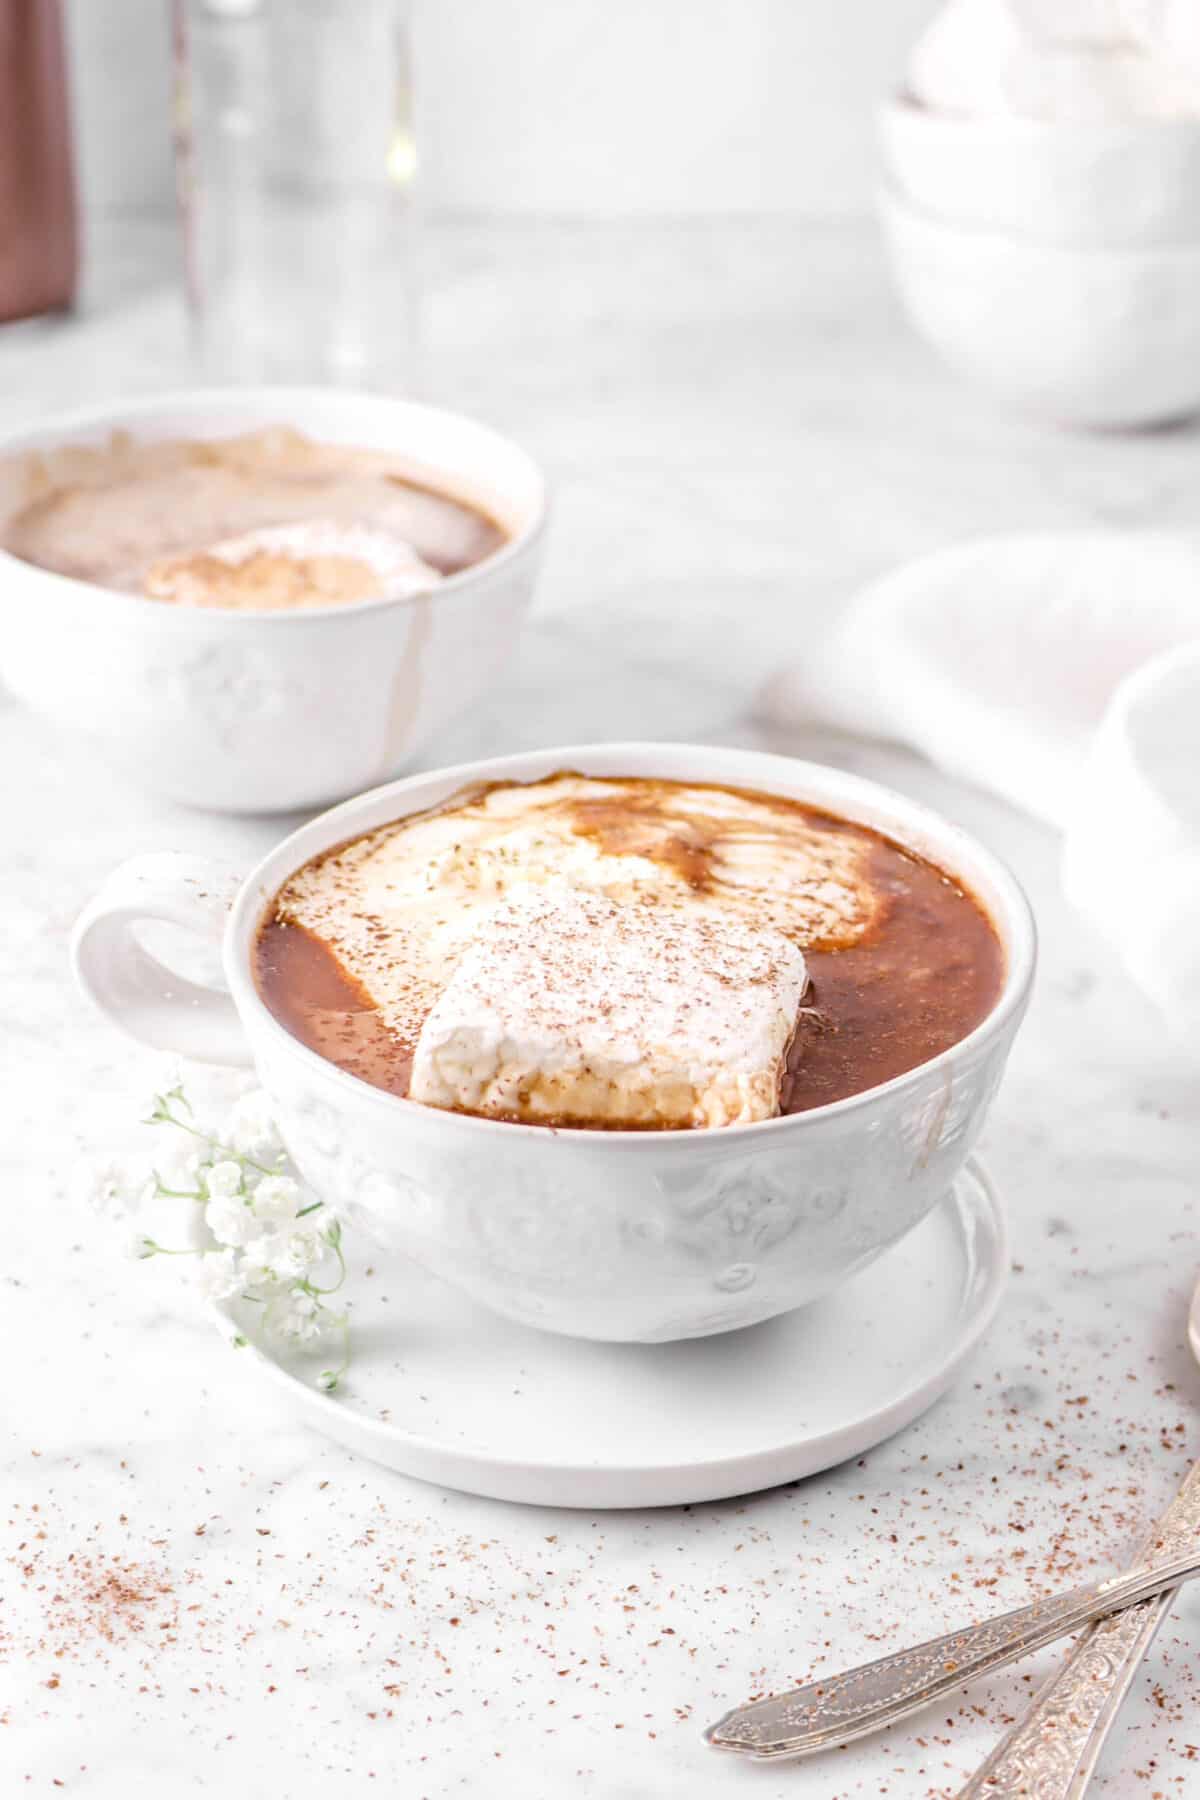 two mugs of hot chocolate with grated chocolate, marshmallows, and two spoons